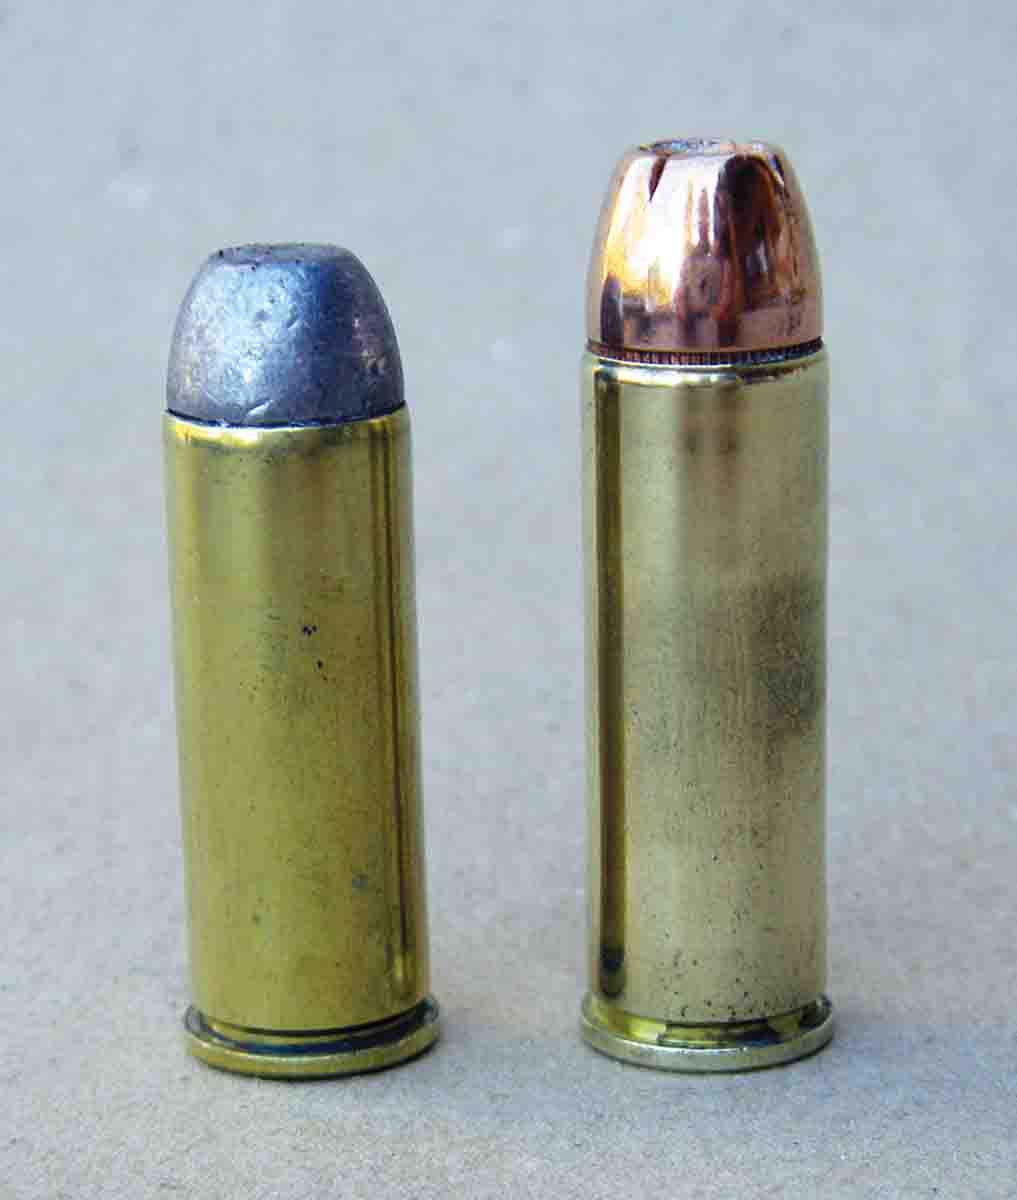 The .454 Casull (right) is a magnum version of the .45 Colt (left), but rather than being loaded at 14,000 psi, maximum average pressure is 65,000 psi.